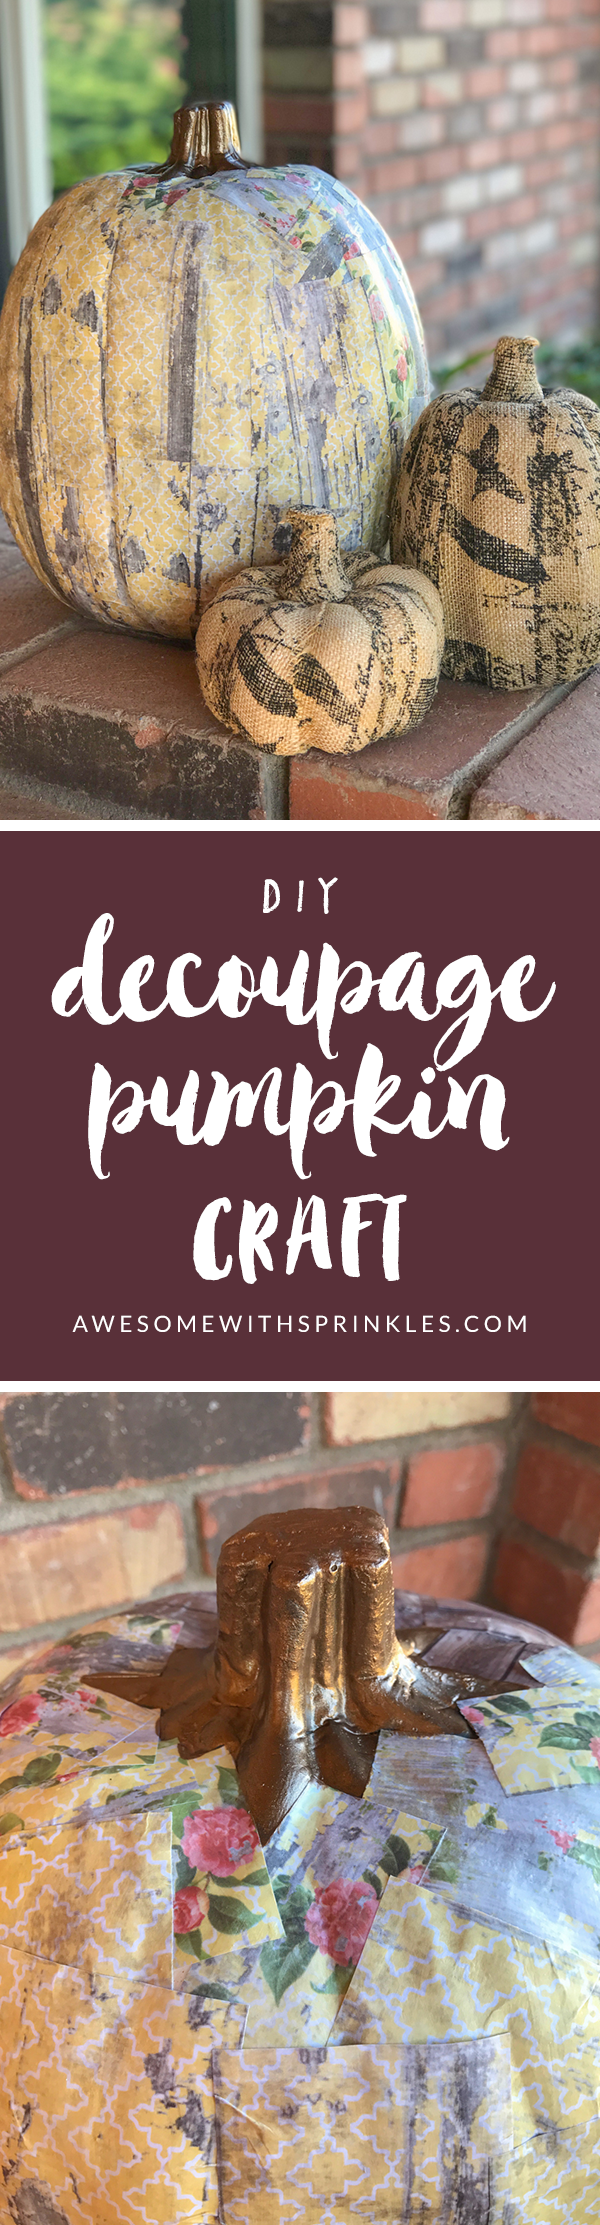 Decoupage Pumpkin Craft | Awesome with Sprinkles